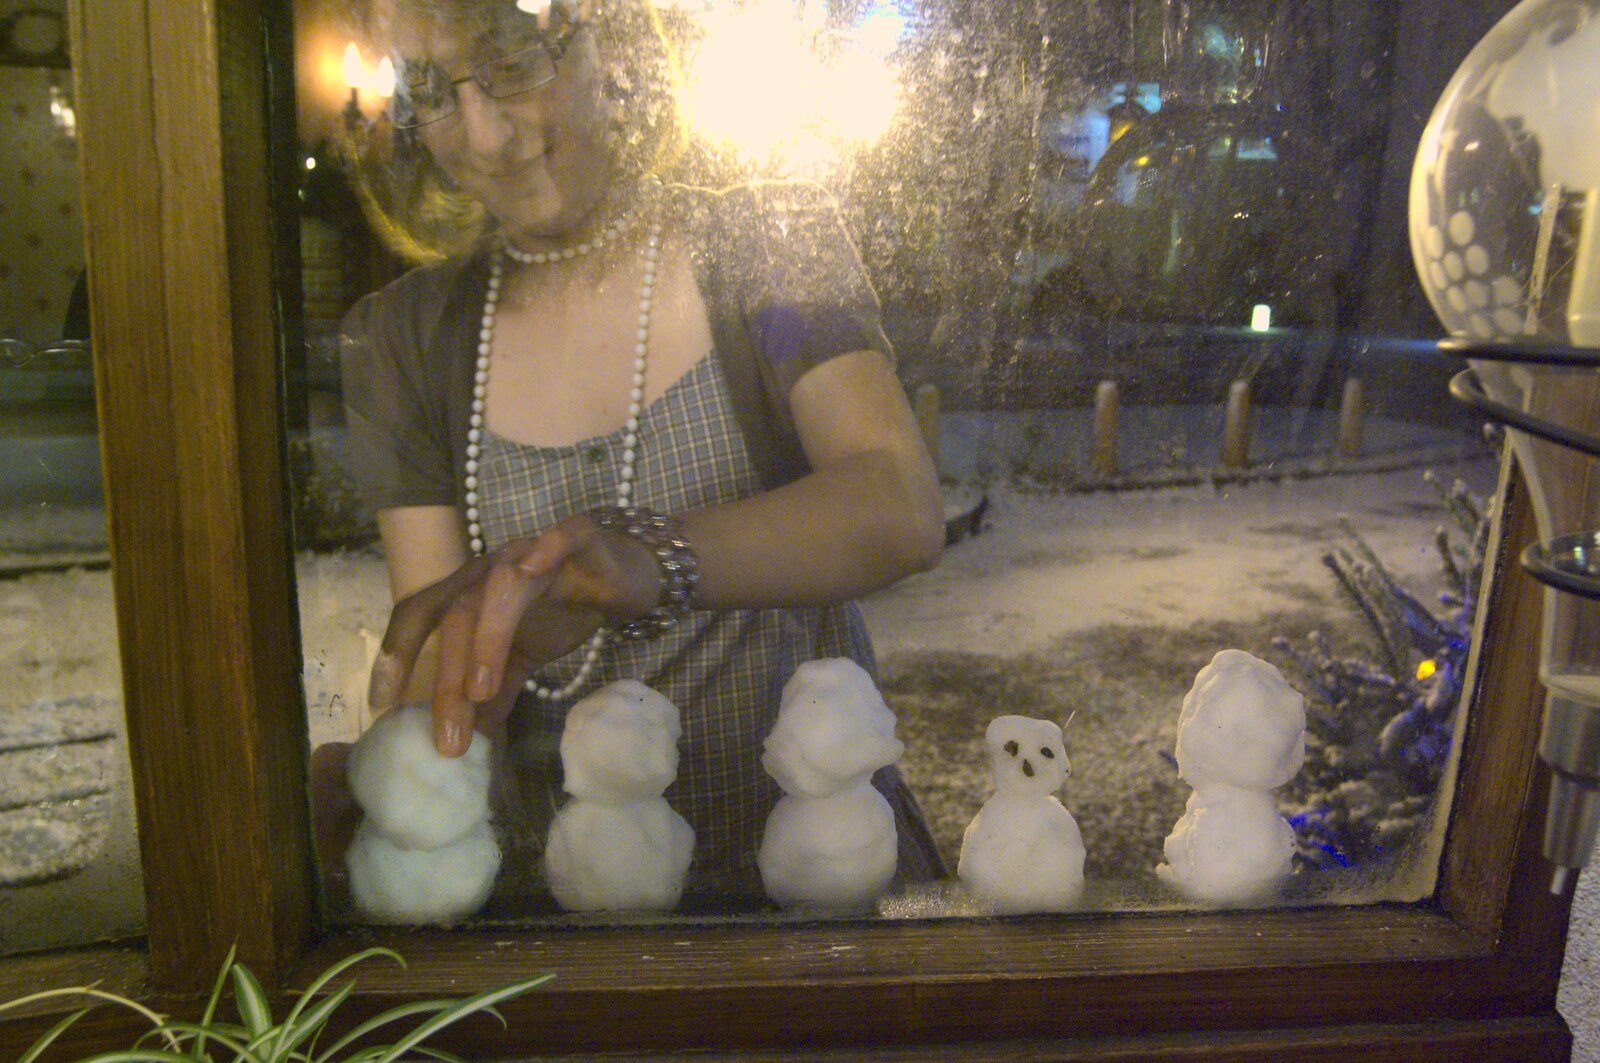 New Year's Eve at the Swan Inn, and Moonlight Photos, Brome, Suffolk - 31st December 2009: Suey makes more snow-people